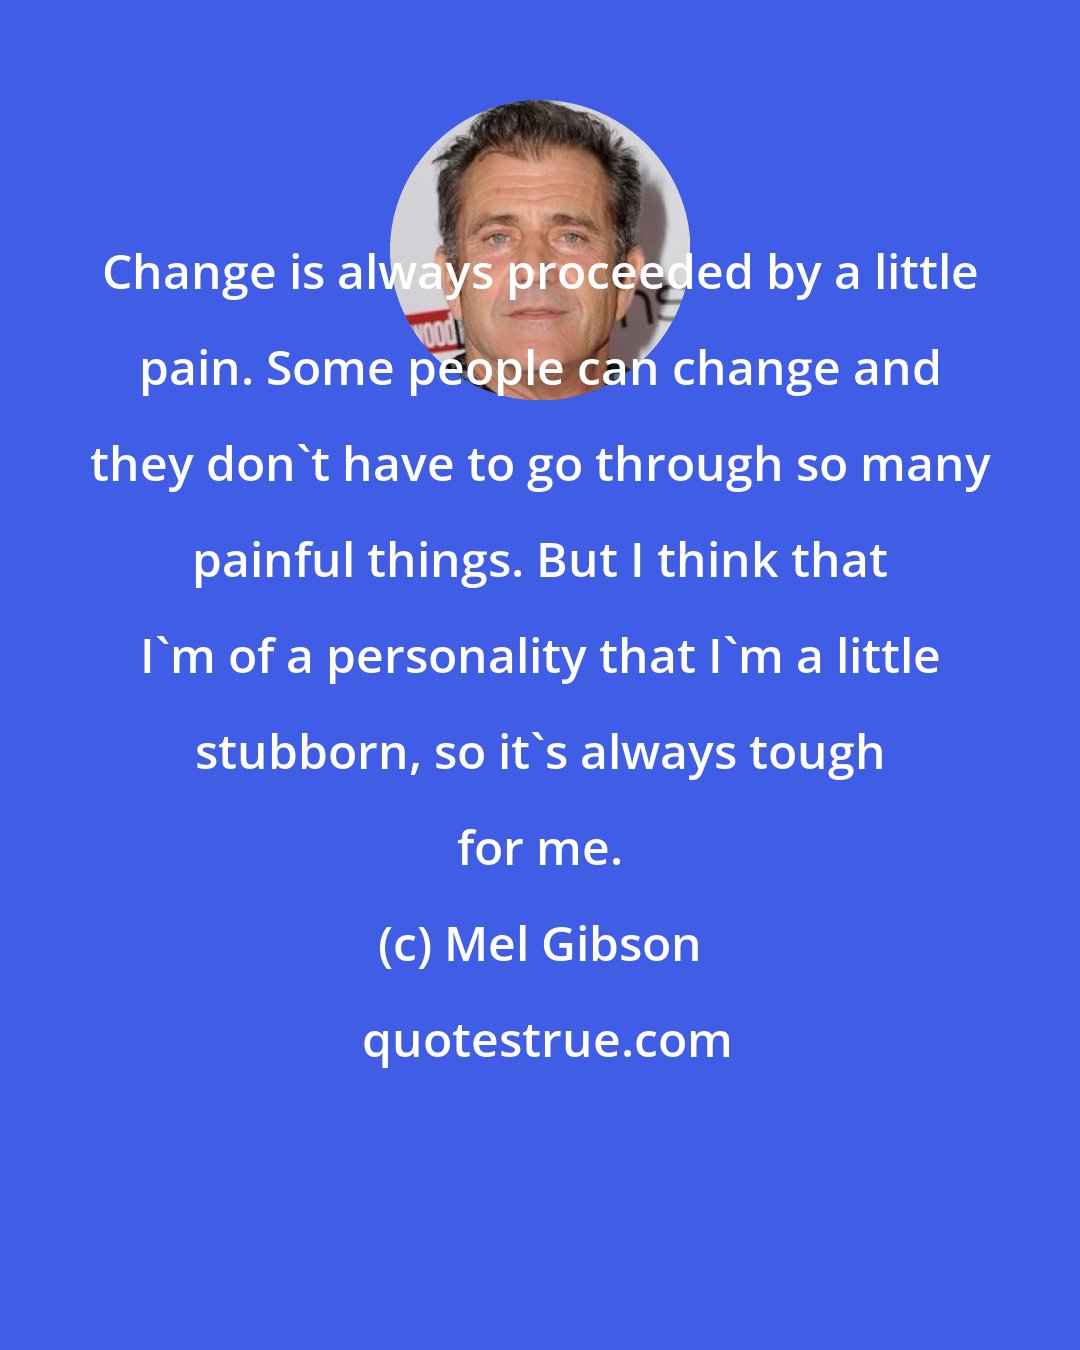 Mel Gibson: Change is always proceeded by a little pain. Some people can change and they don't have to go through so many painful things. But I think that I'm of a personality that I'm a little stubborn, so it's always tough for me.